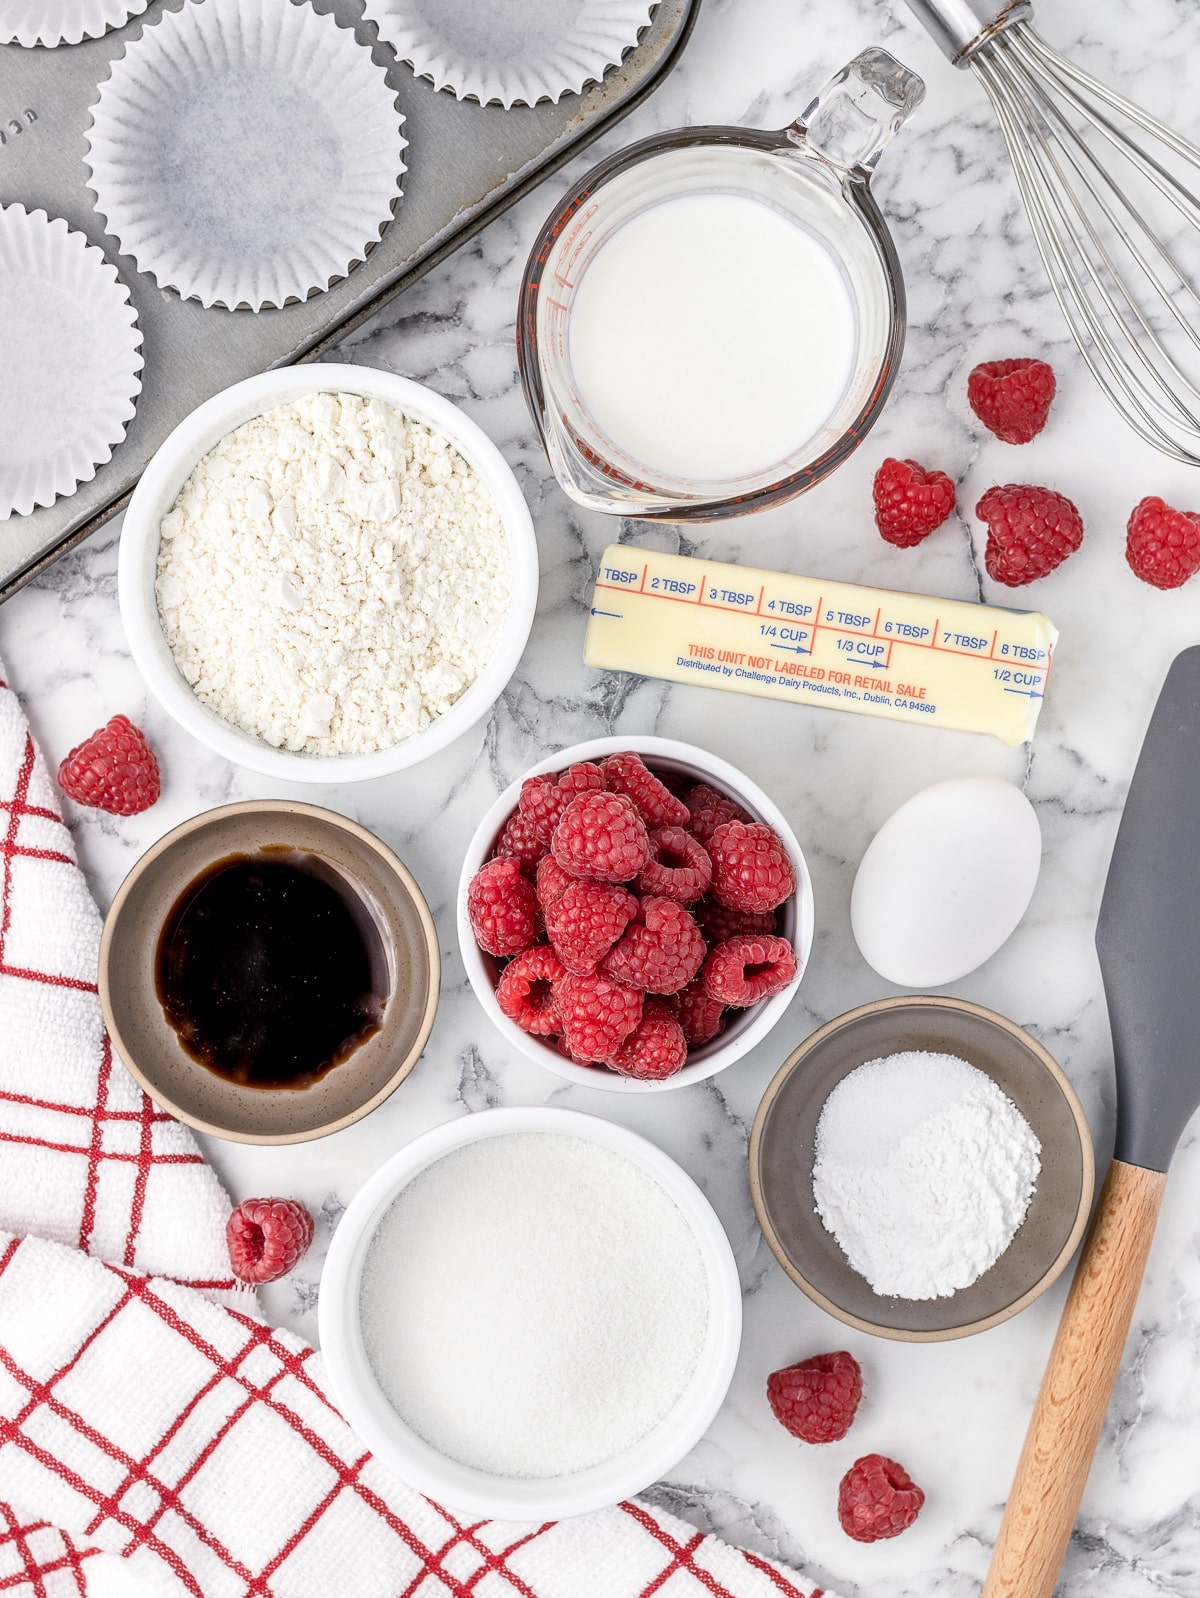 All the ingredients to make Raspberry Cupcakes with cupcaking baking pan lined with baking cups, whisk, spatula, and kitchen towl.